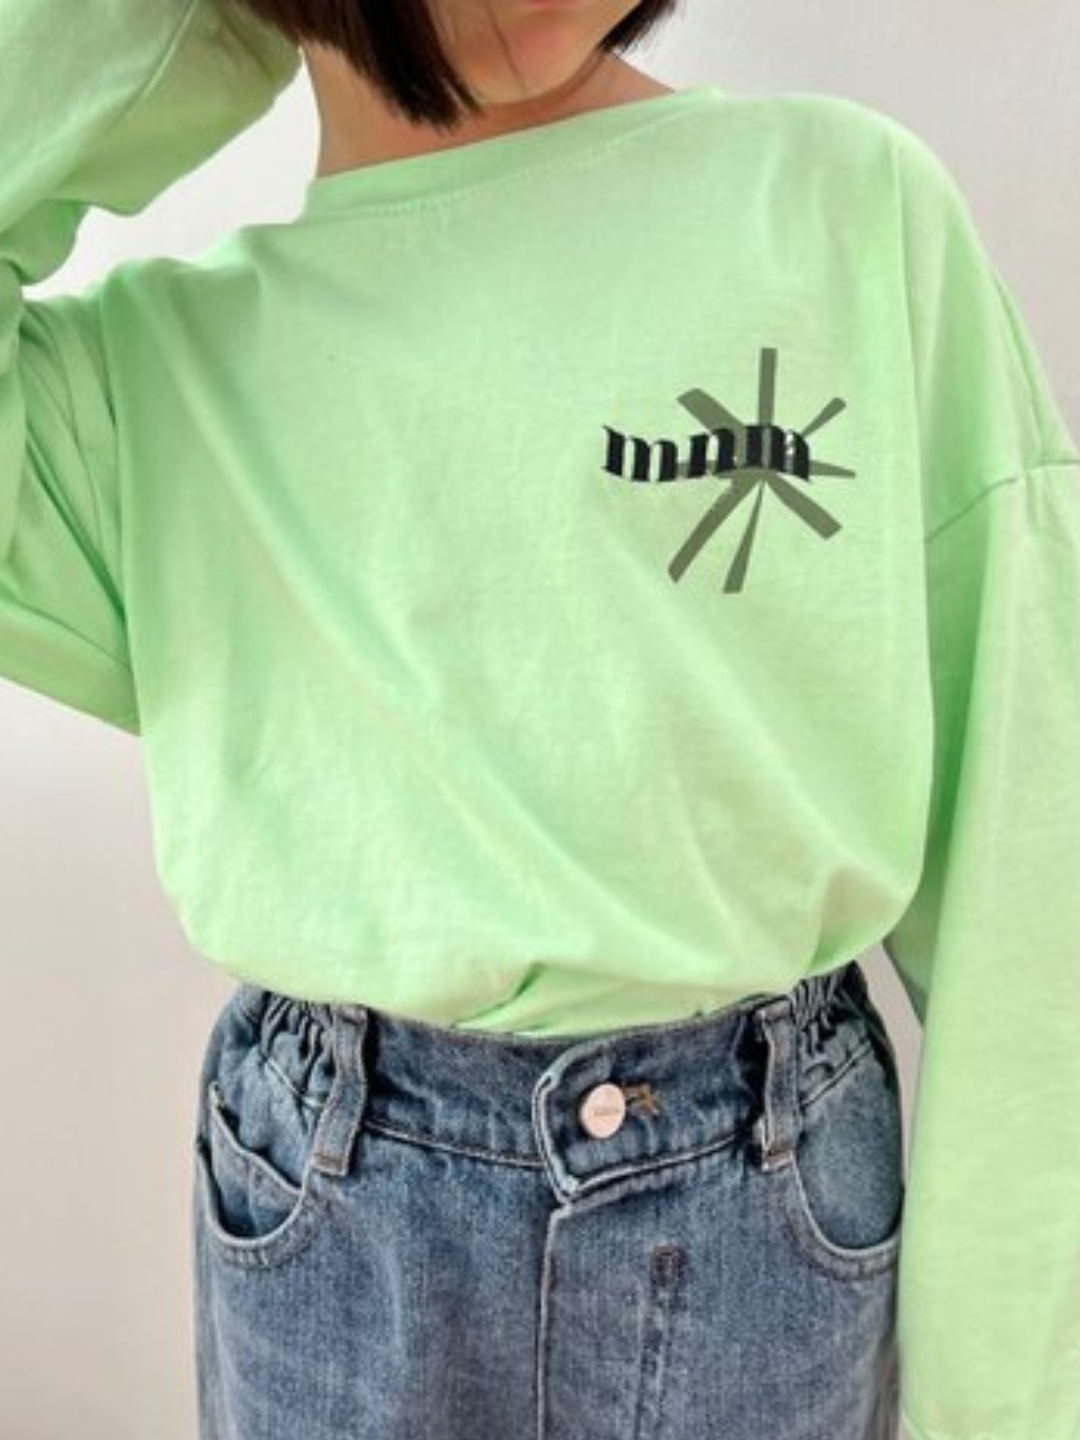 Child is wearing green Minimal Longsleeve Tee with blue jeans